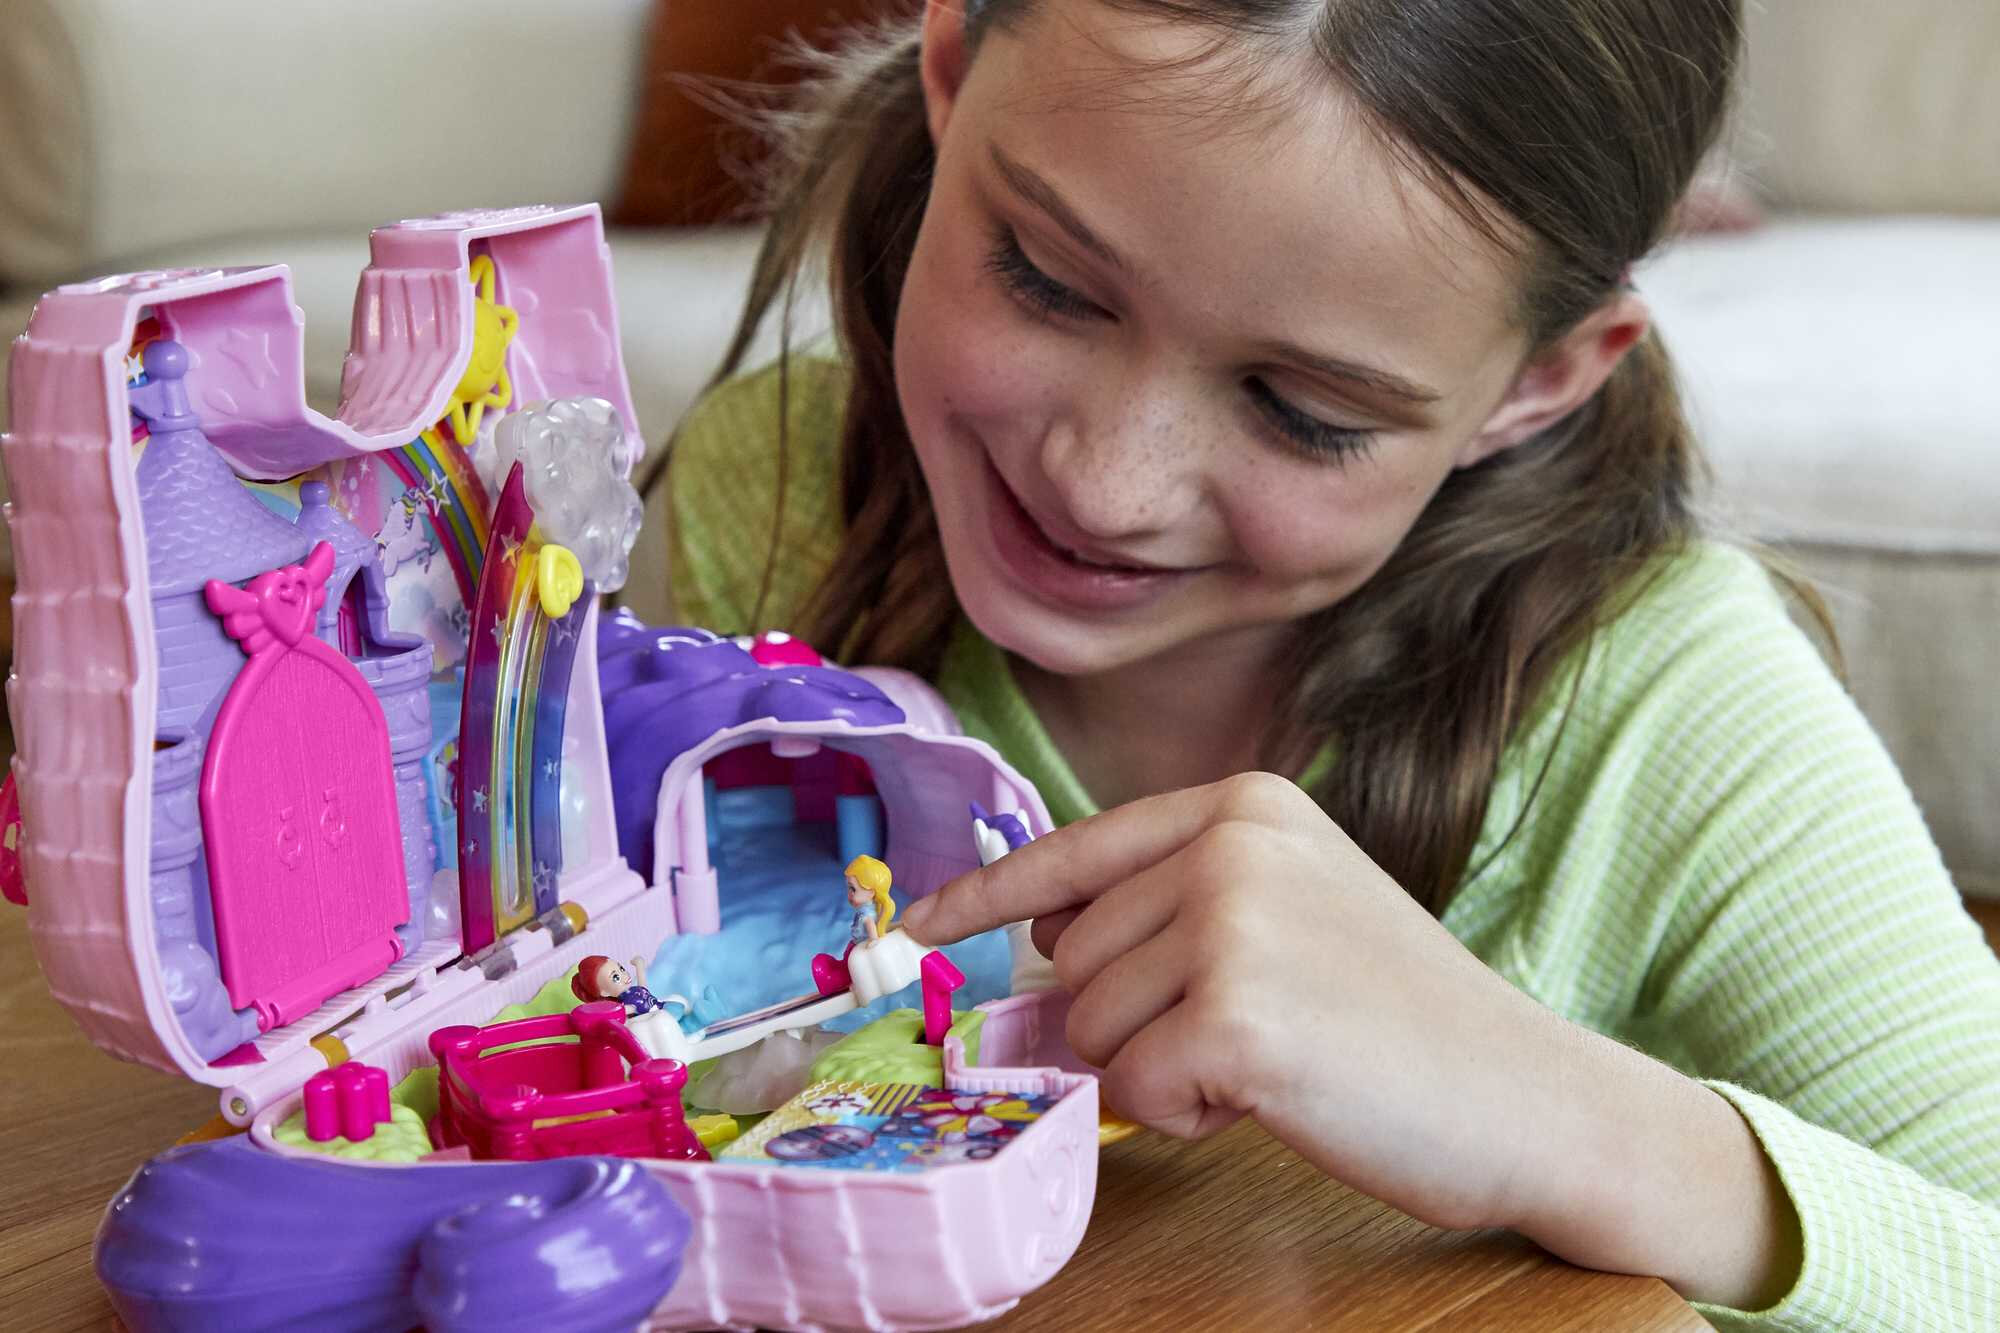 Polly Pocket 2-in-1 Unicorn Party Travel Toy, Large Compact with 2 Dolls & 25 Surprise Accessories - image 4 of 9